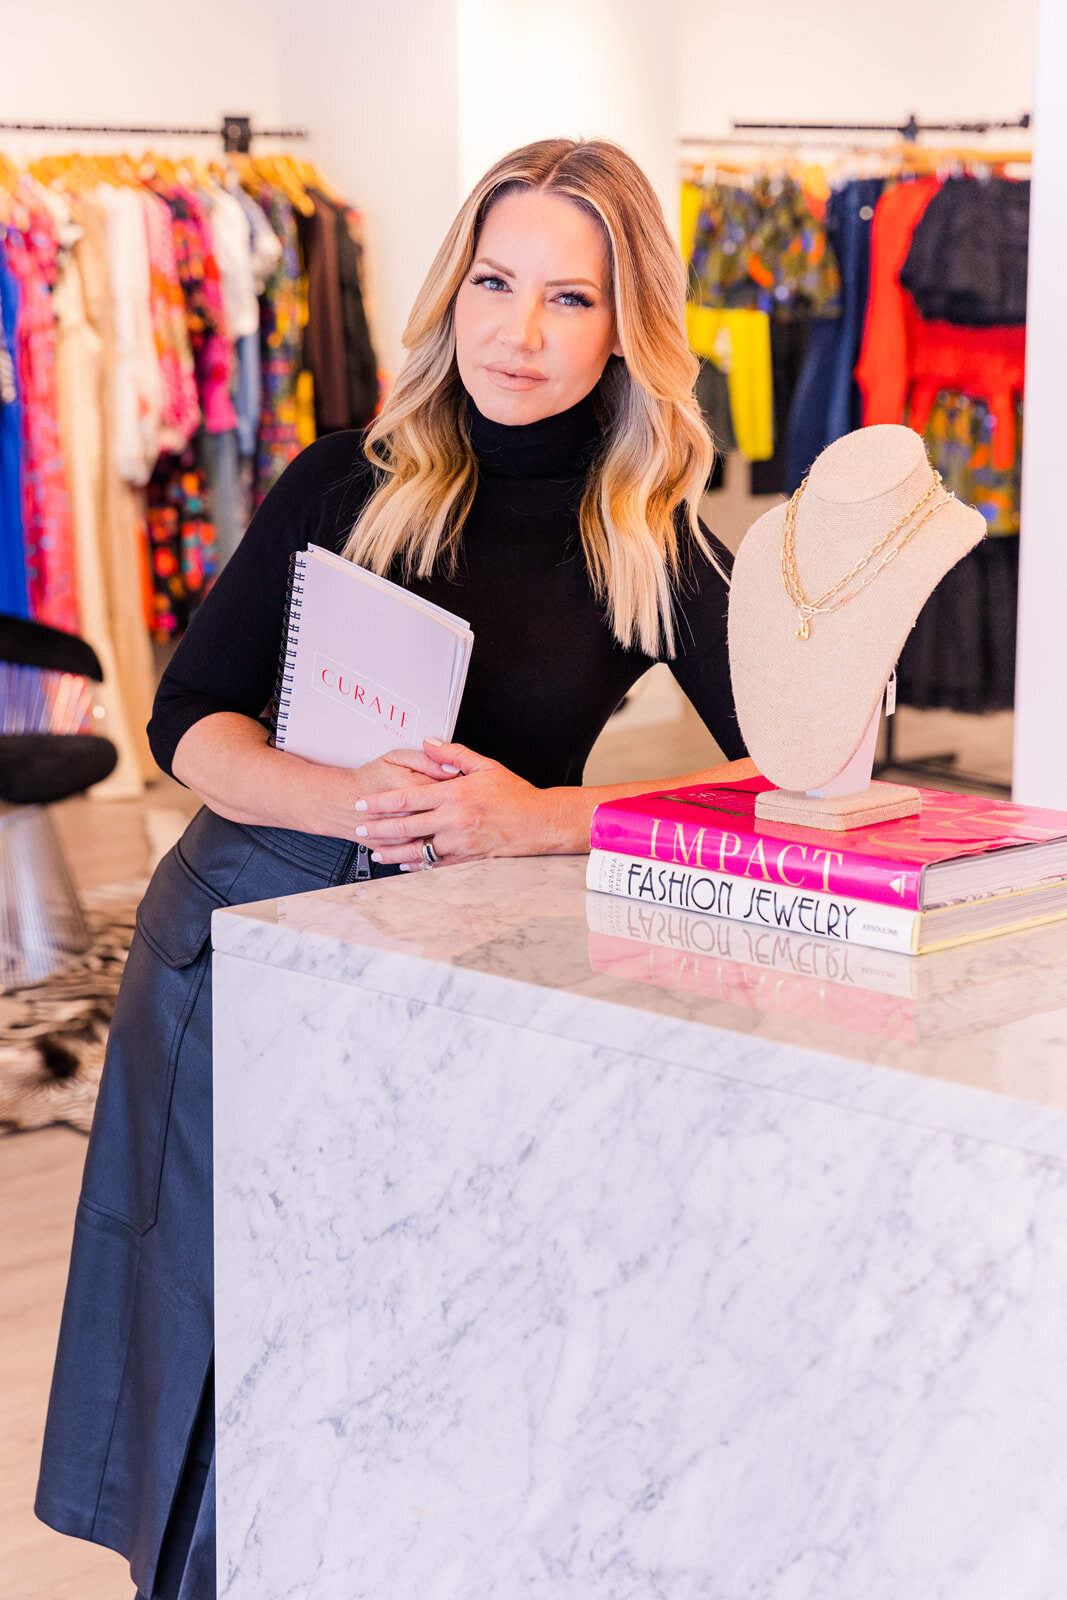 stylist standing next to a fashion store counter holding branded notbook and wearing black turtleneck  Atlanta personal brand photographer | Laure Photography branding